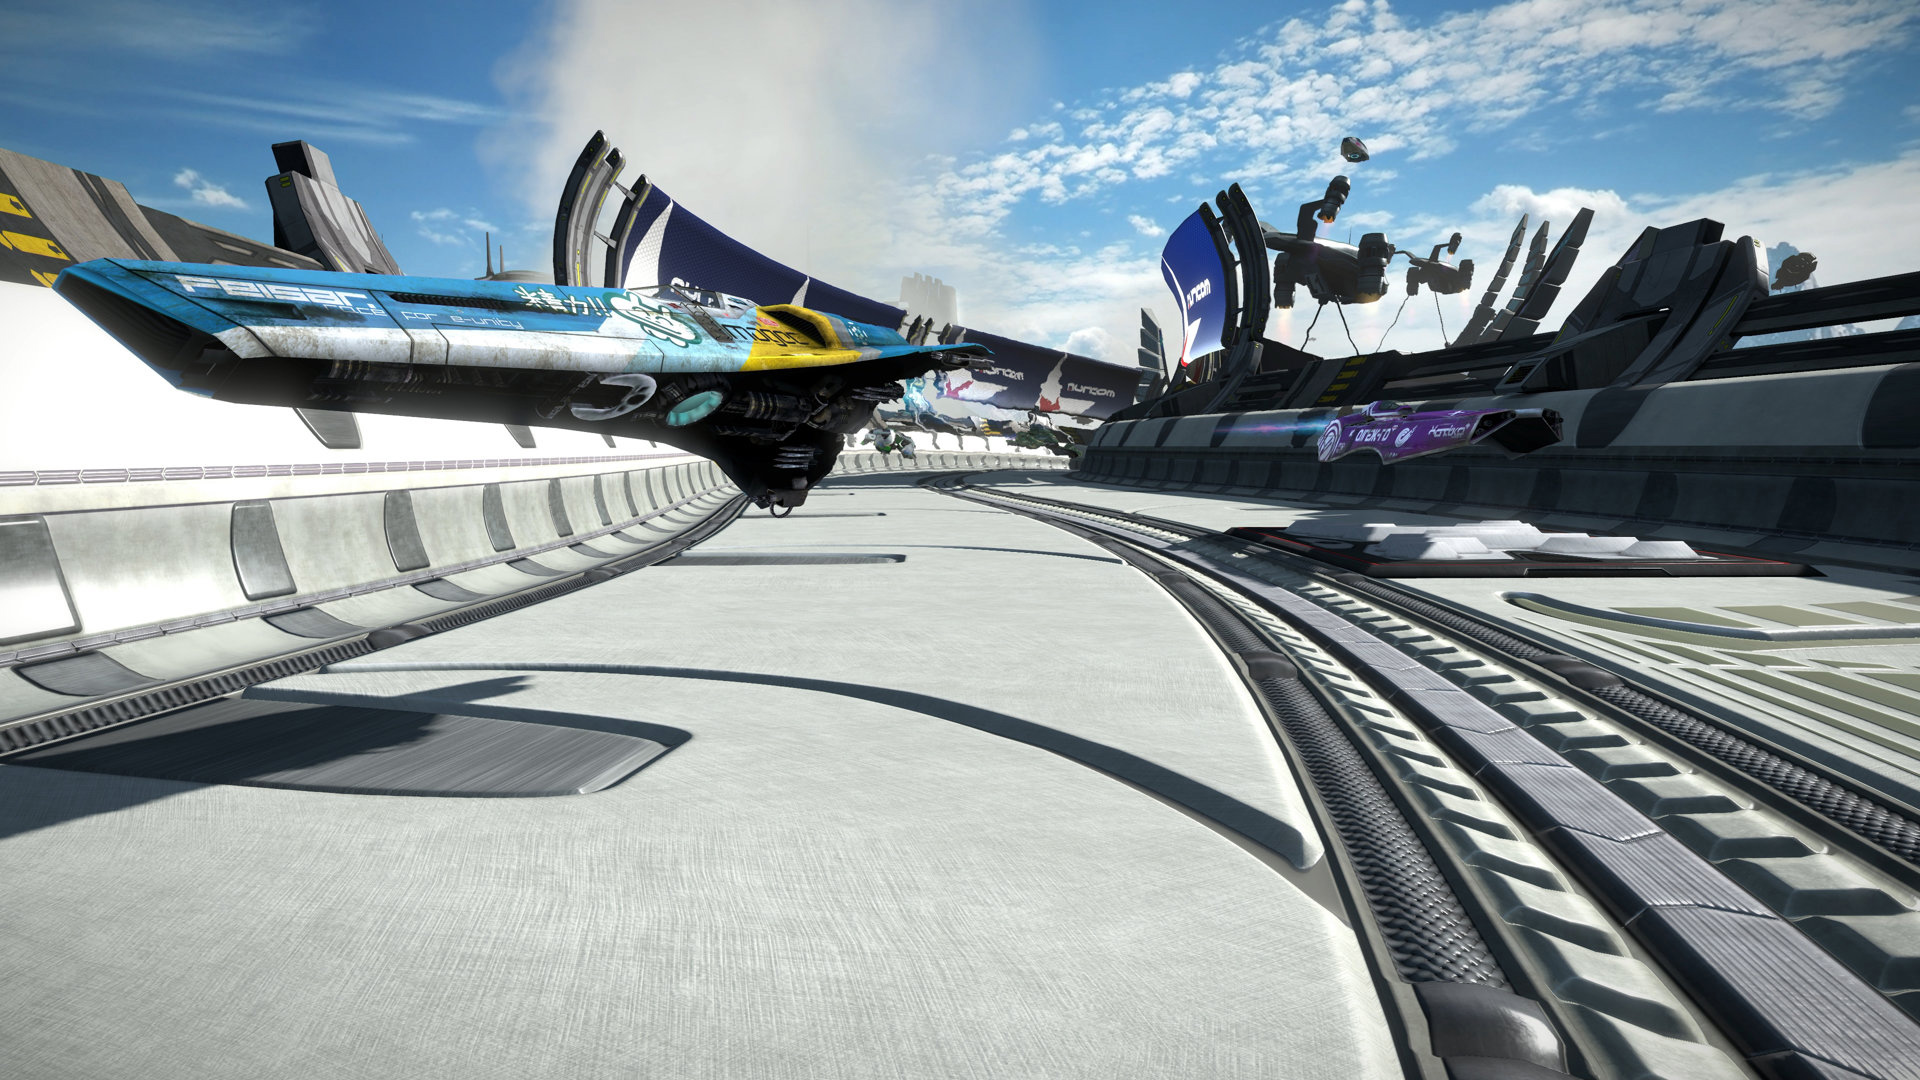 WipEout Omega Collection is in VR – Destructoid